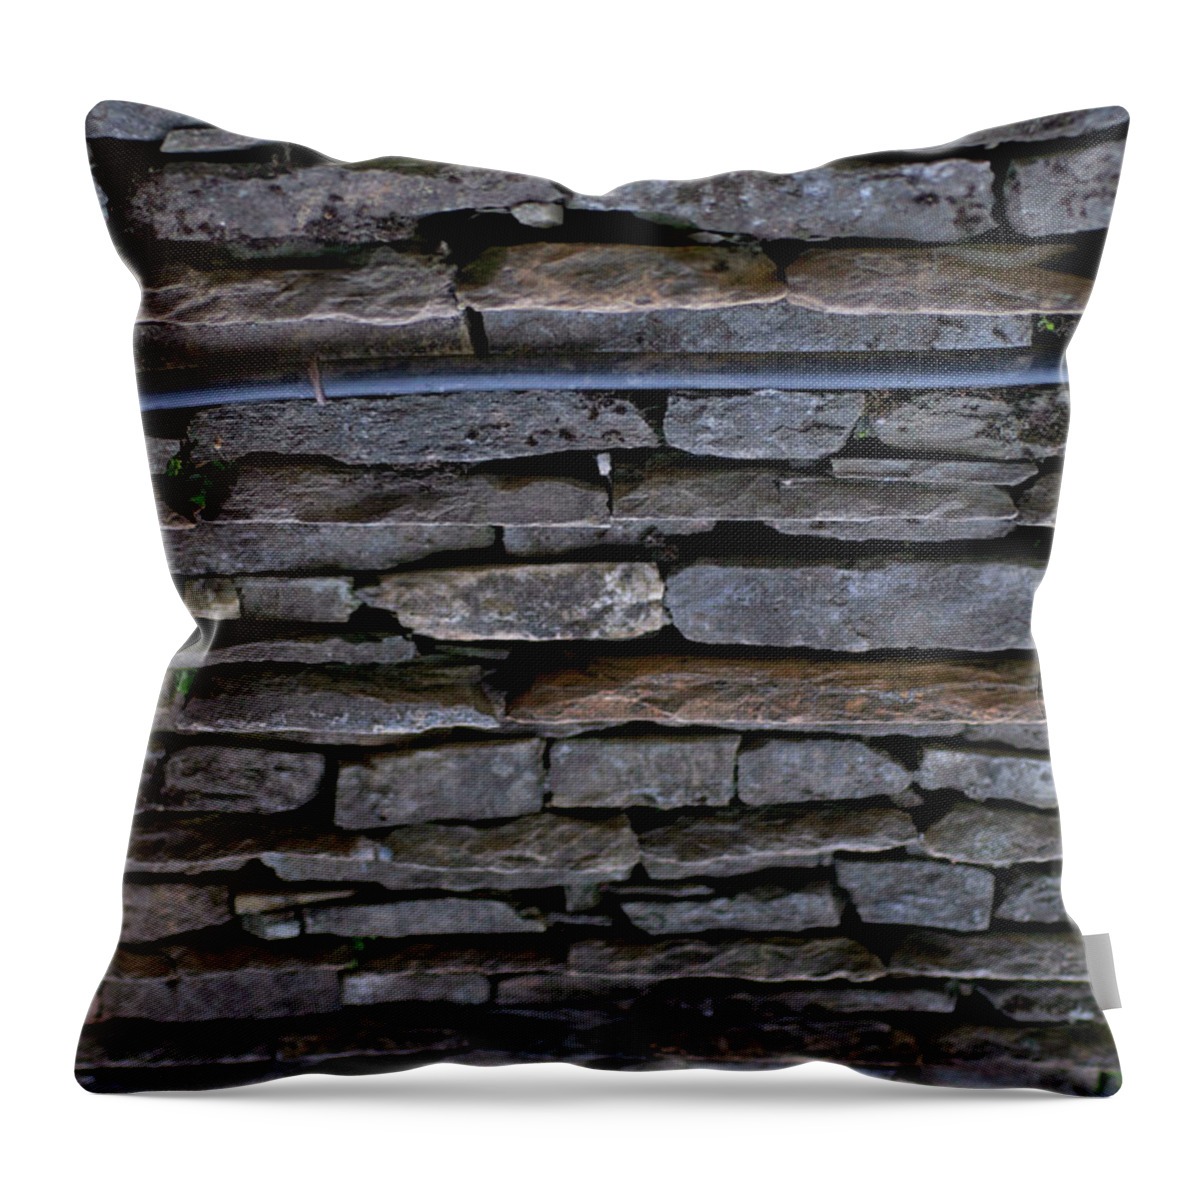 Slate Throw Pillow featuring the photograph Plastic Water Pipe Crossing A Slate by Jim Simmen